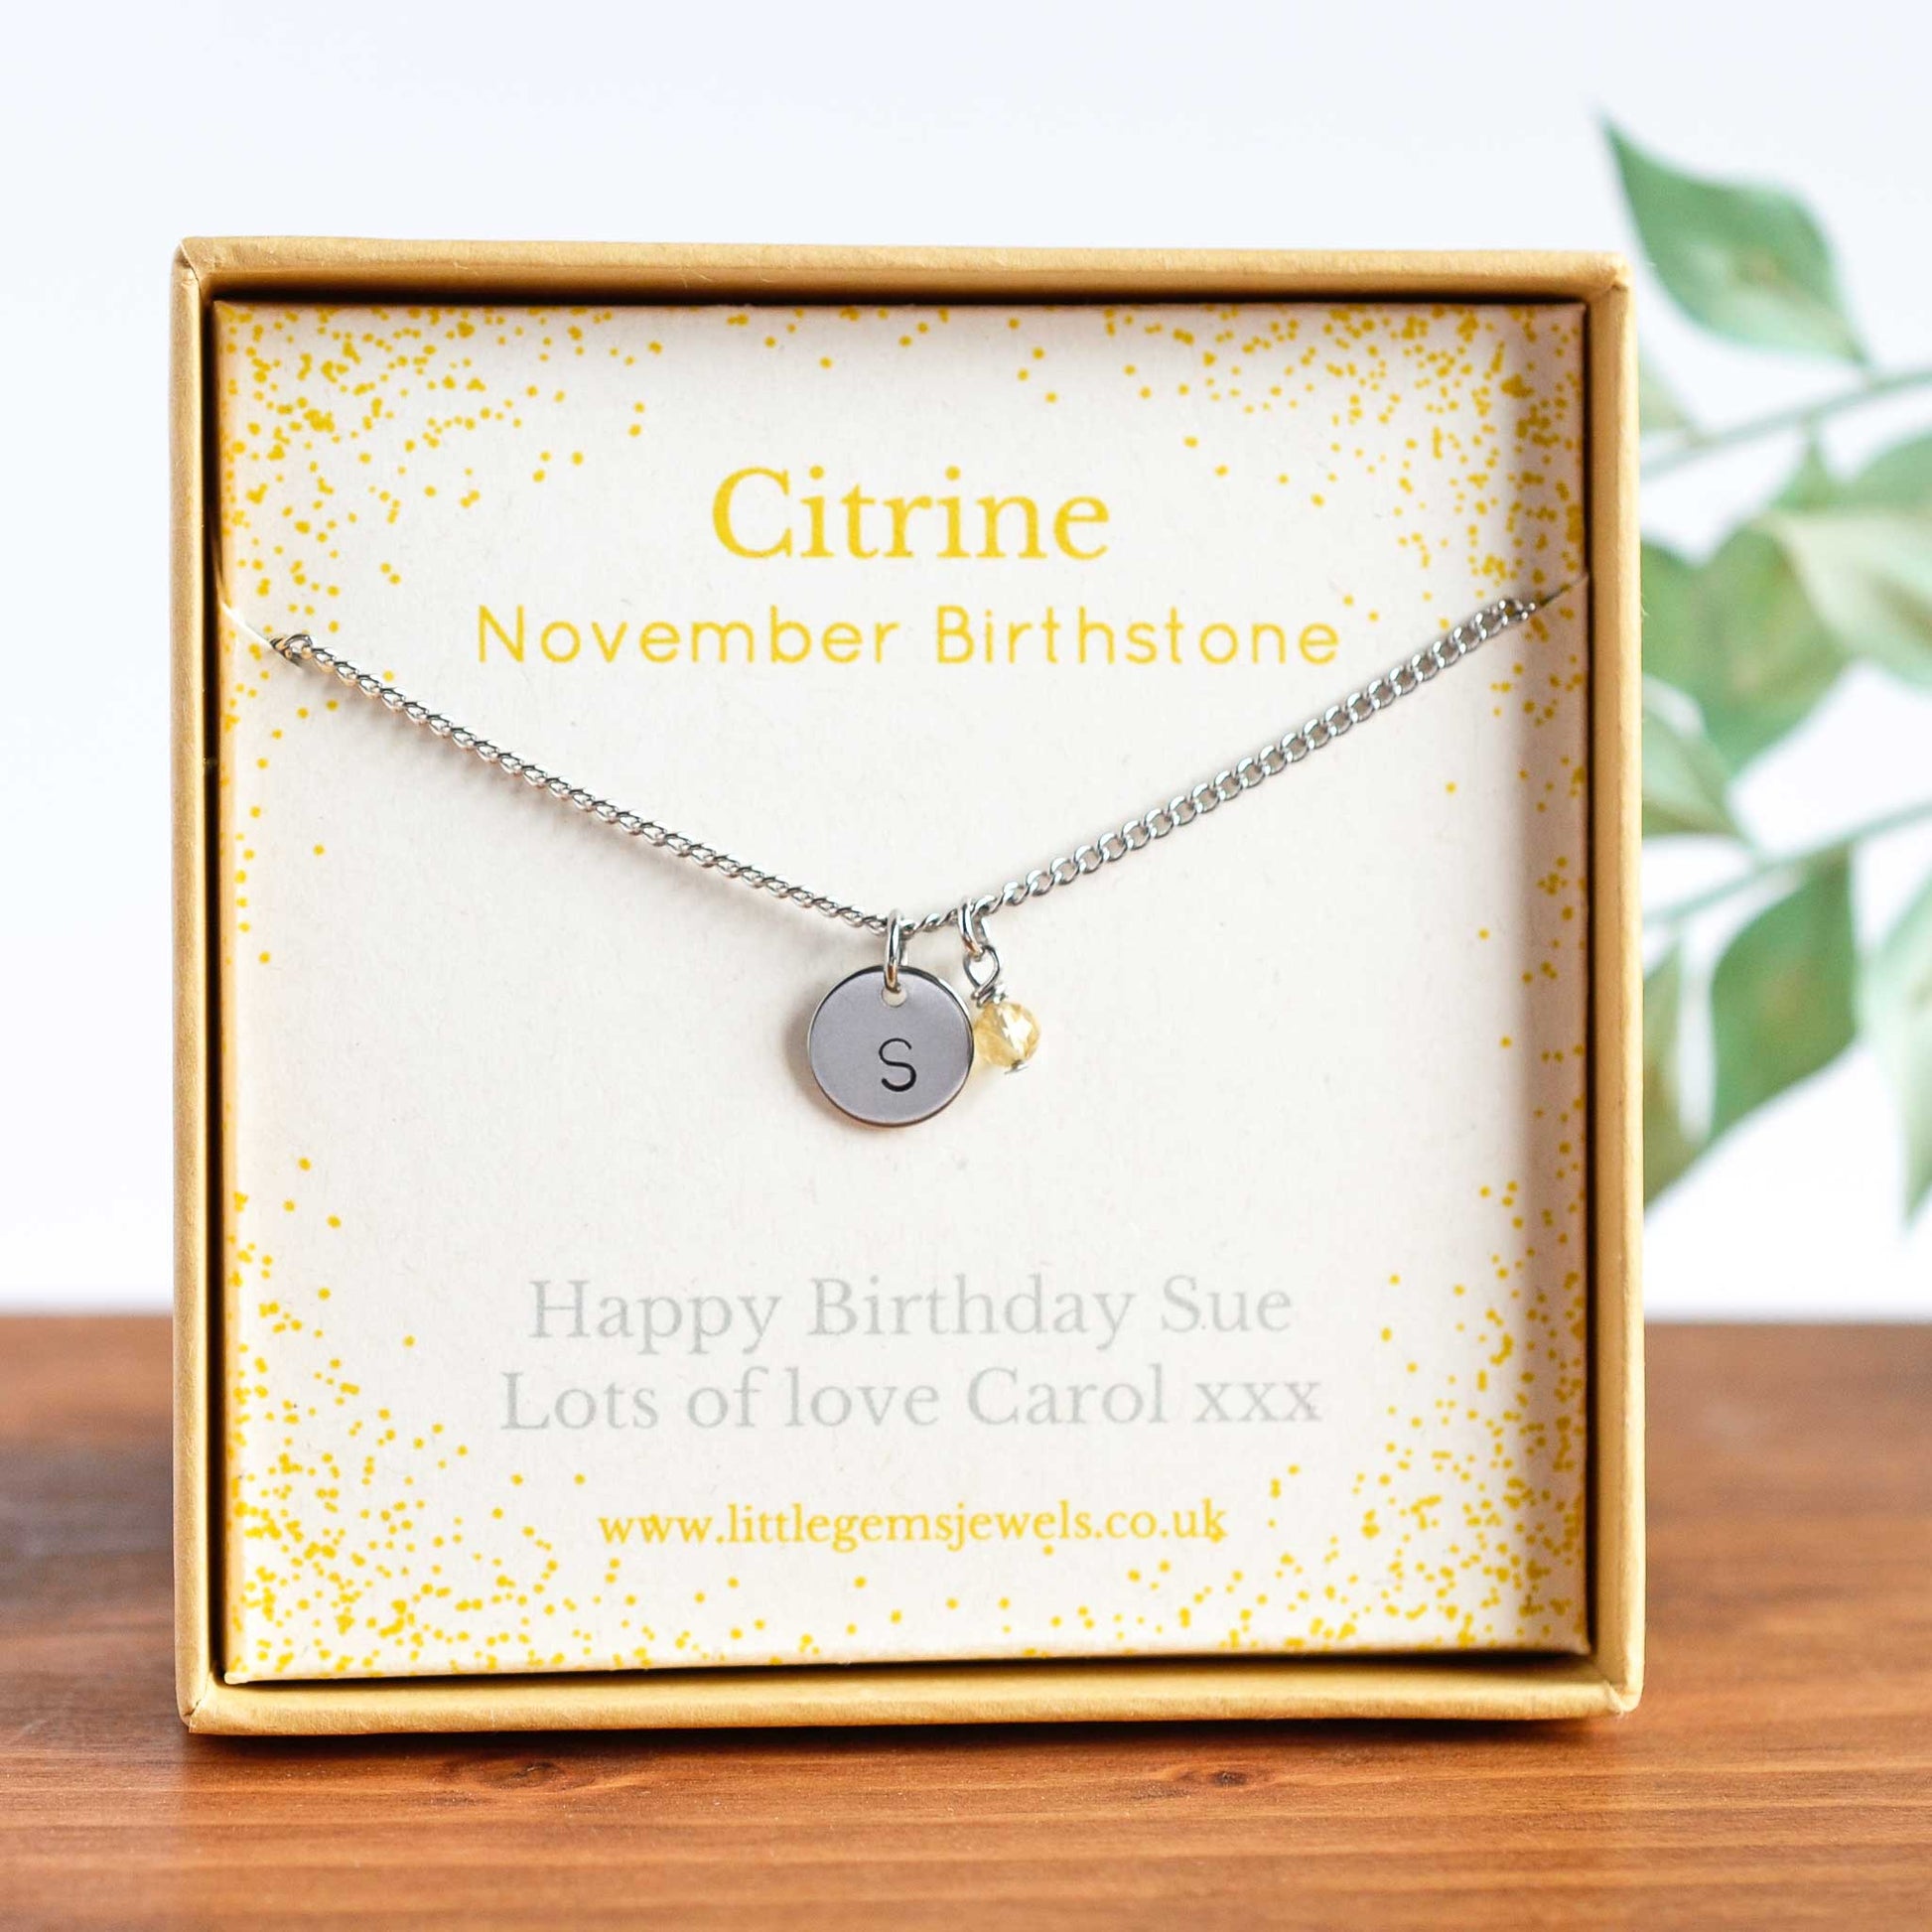 November Birthstone necklace with initial charm & personalised gift message in eco friendly gift box